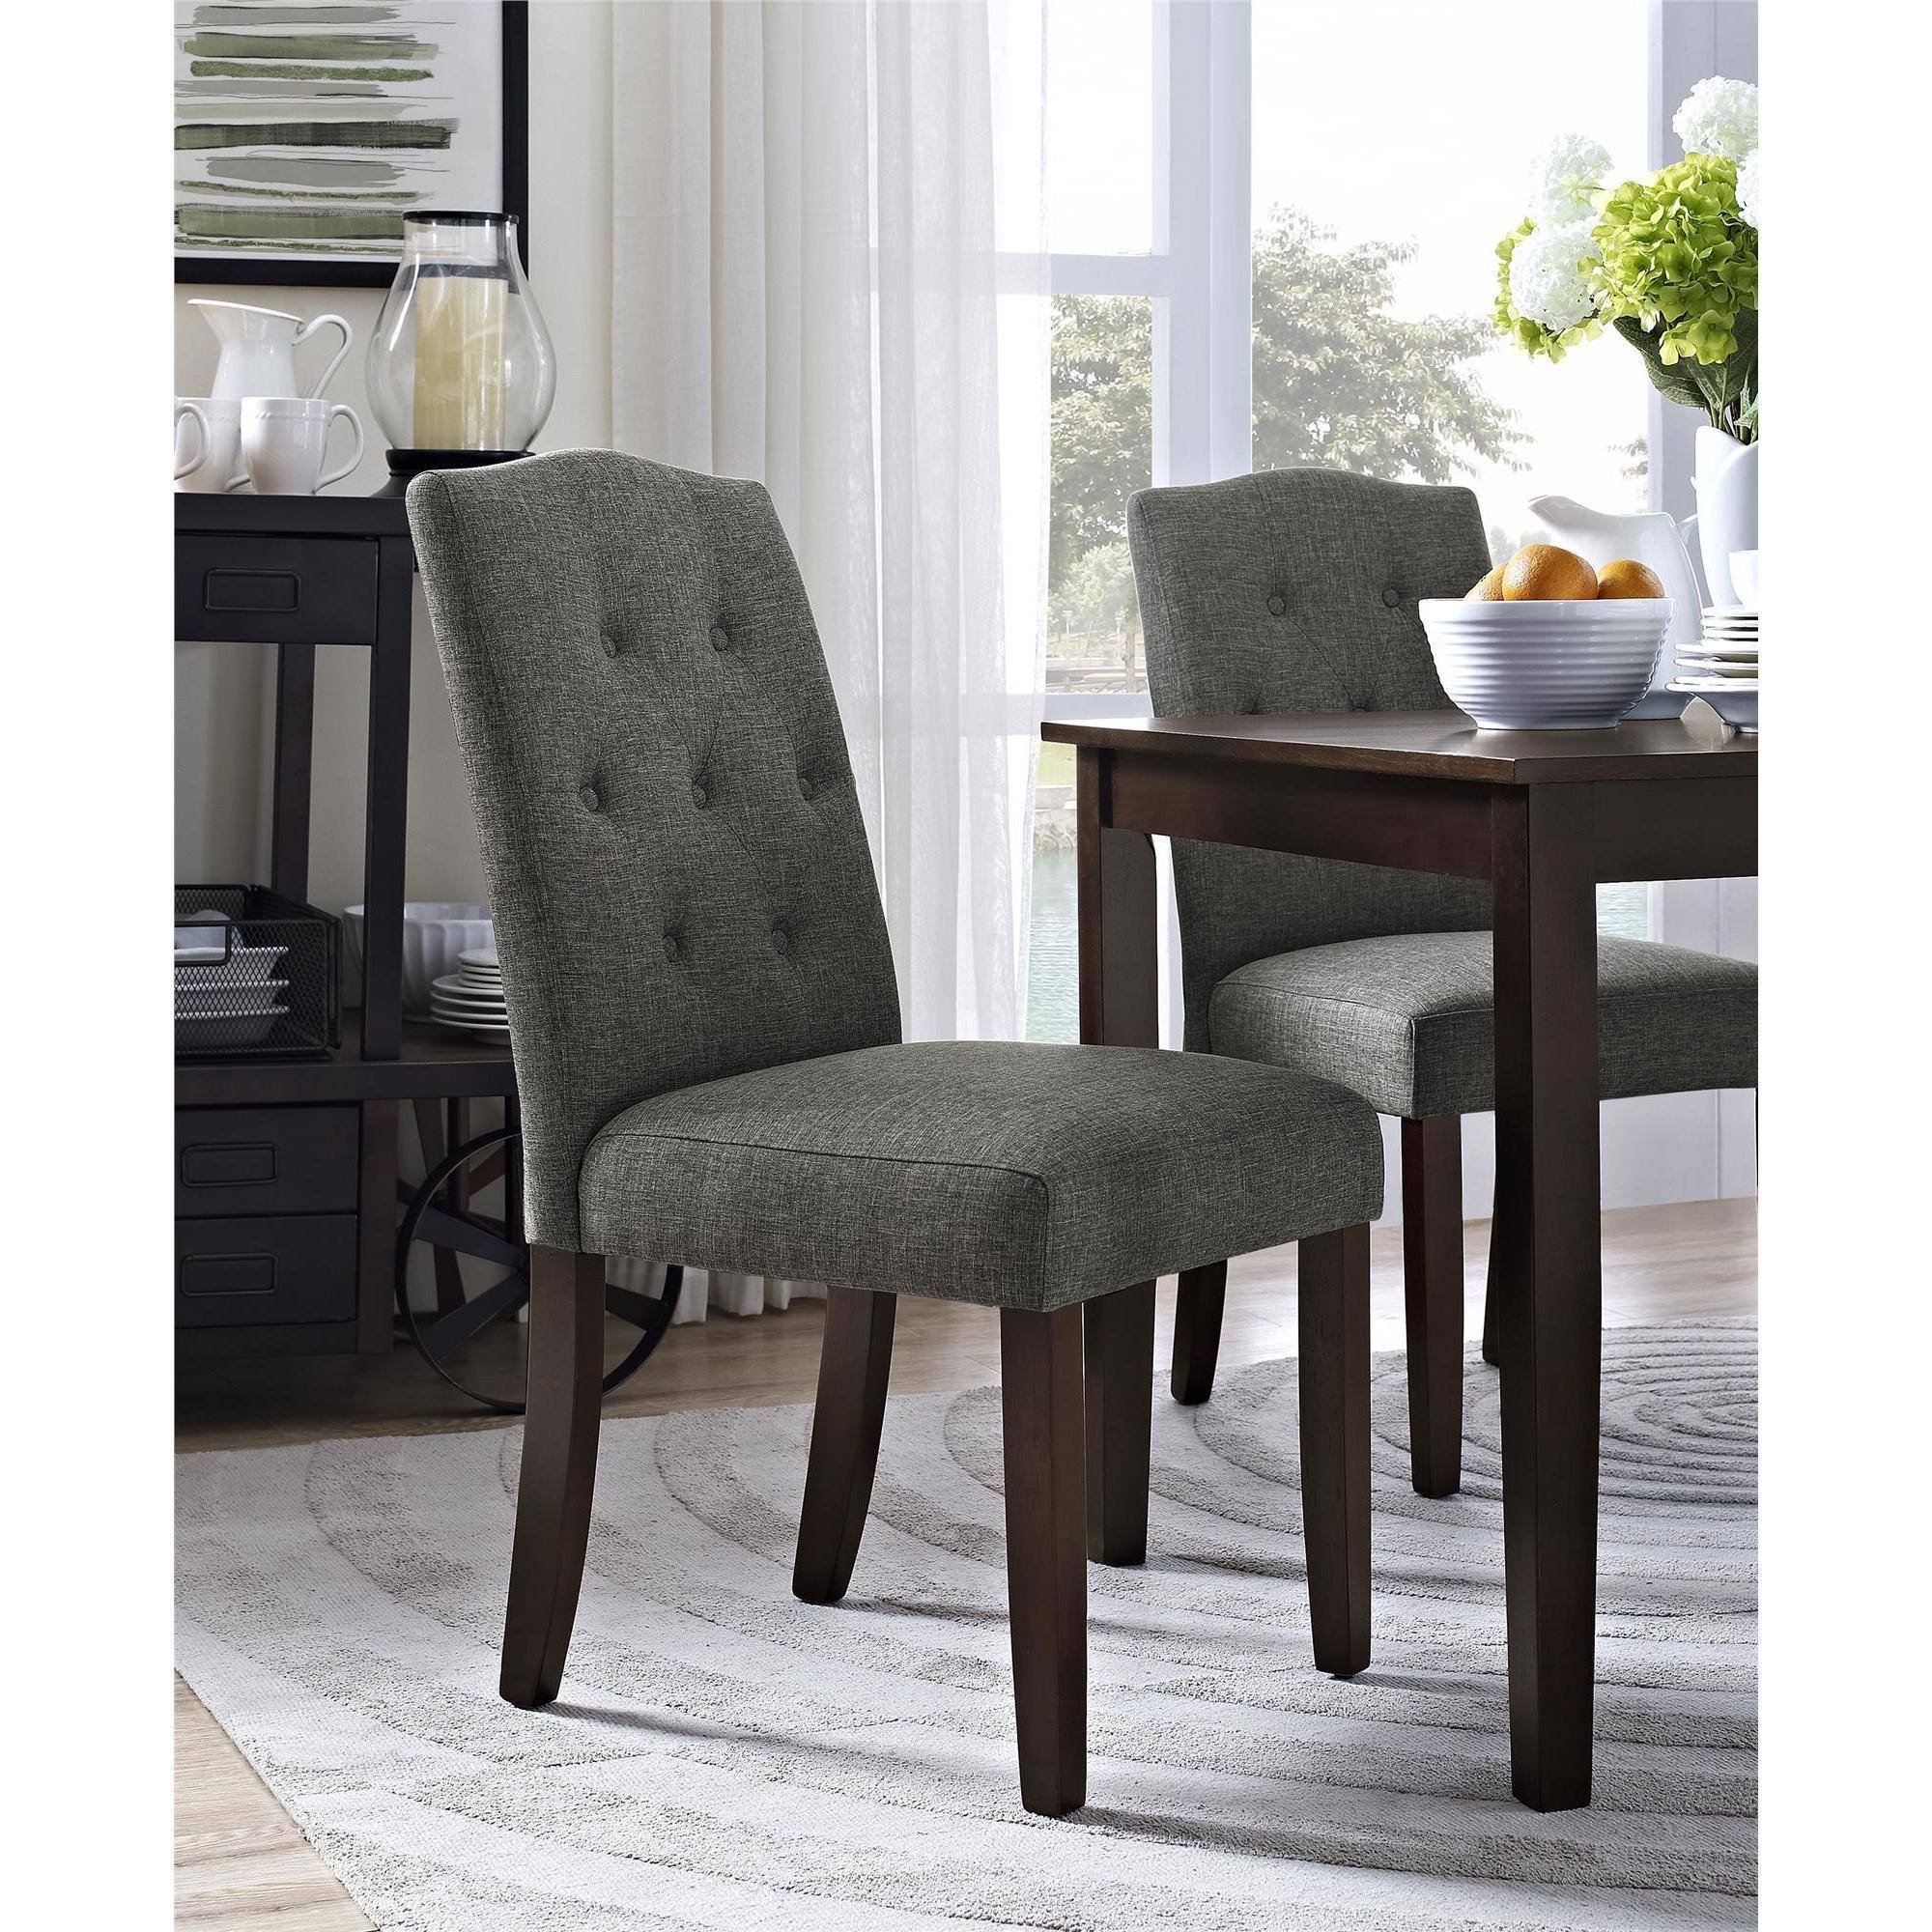 Better Homes and Gardens 7-Piece Dining Set with Upholstered Chairs